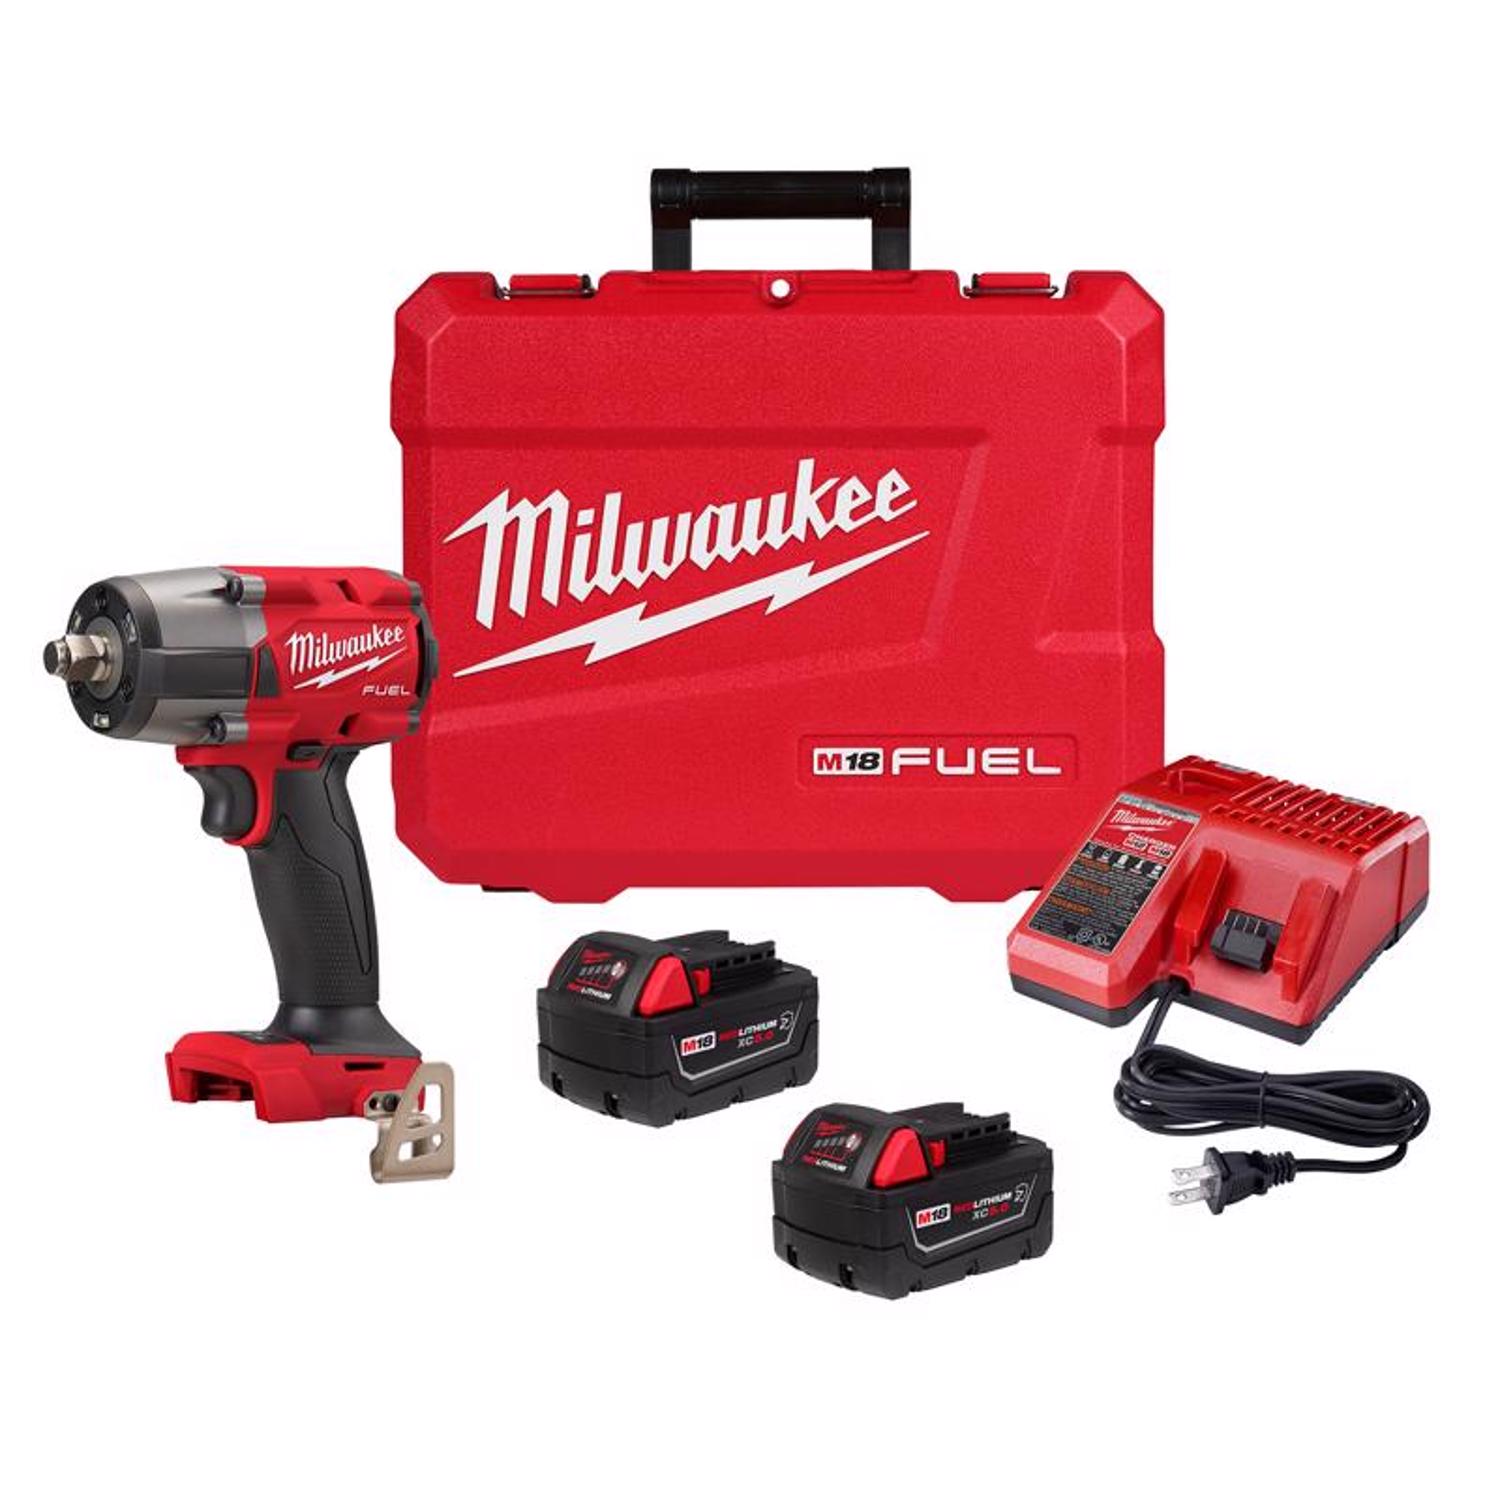 Photos - Drill / Screwdriver Milwaukee M18 FUEL 1/2 in. Cordless Brushless Mid-Torque Impact Wrench Kit 